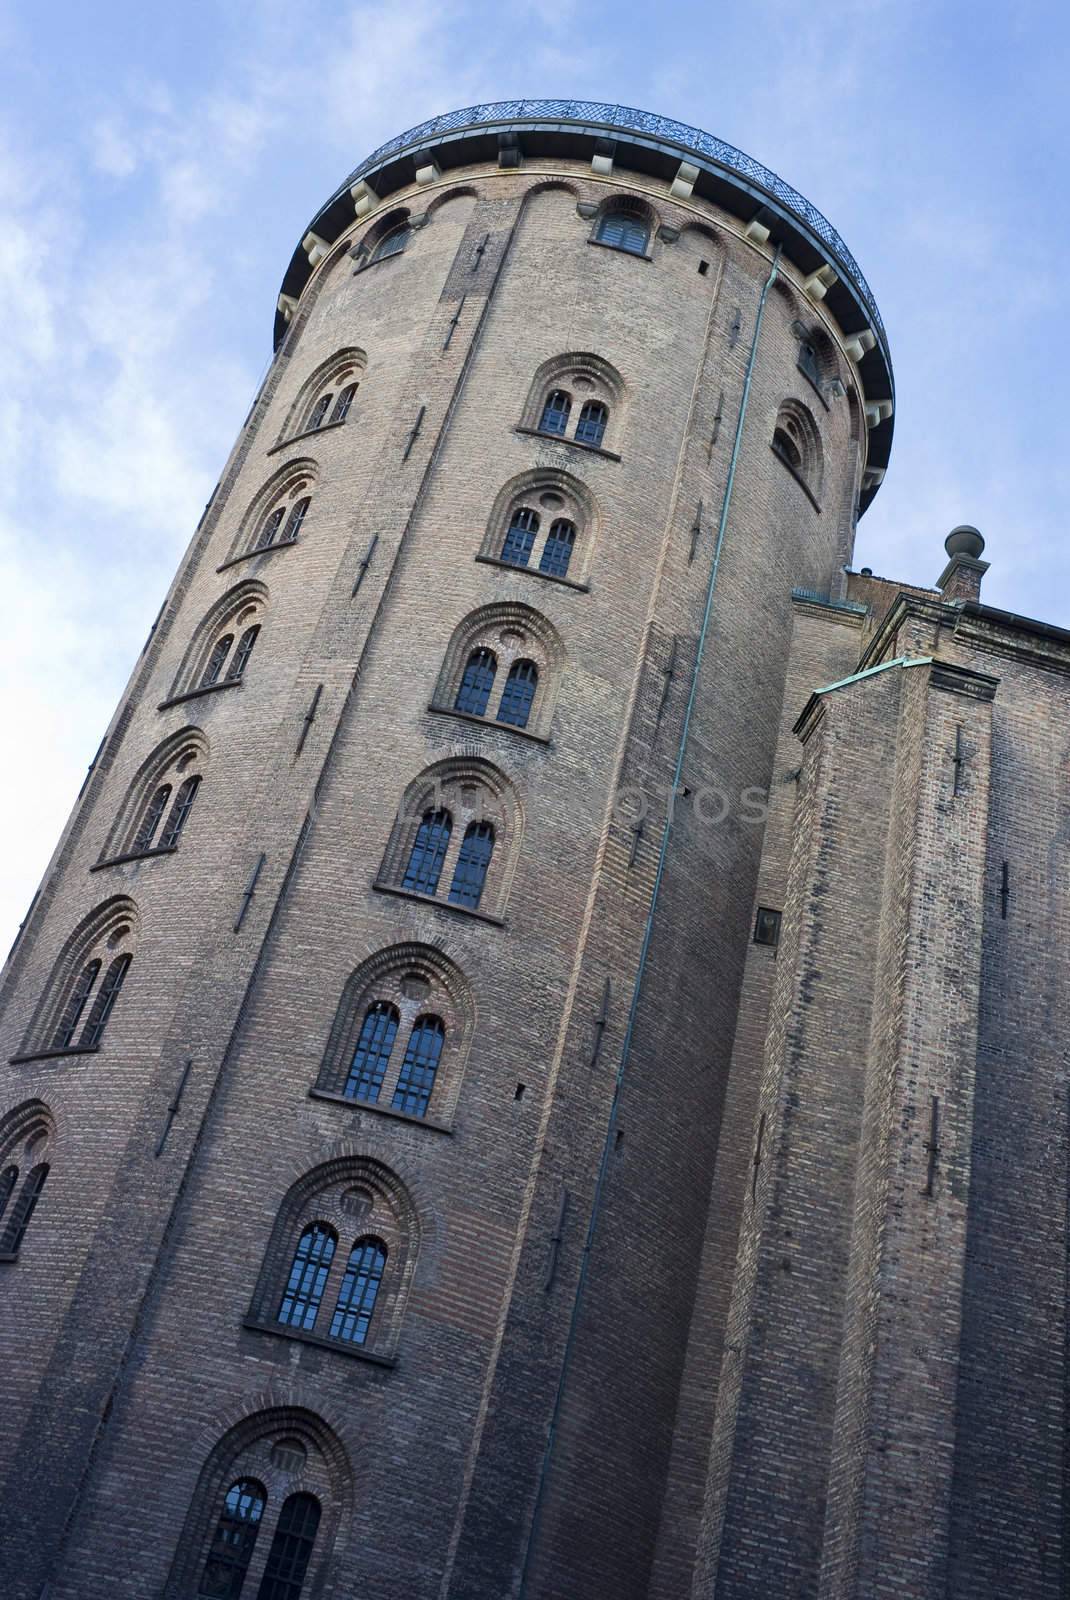 Round Tower of Copenhagen ( Runde Taarn) built by king Christian the fourth in the years 1637-42 as an observatory. In the same complex the Trinitas Church which in the early years was used as a university library.